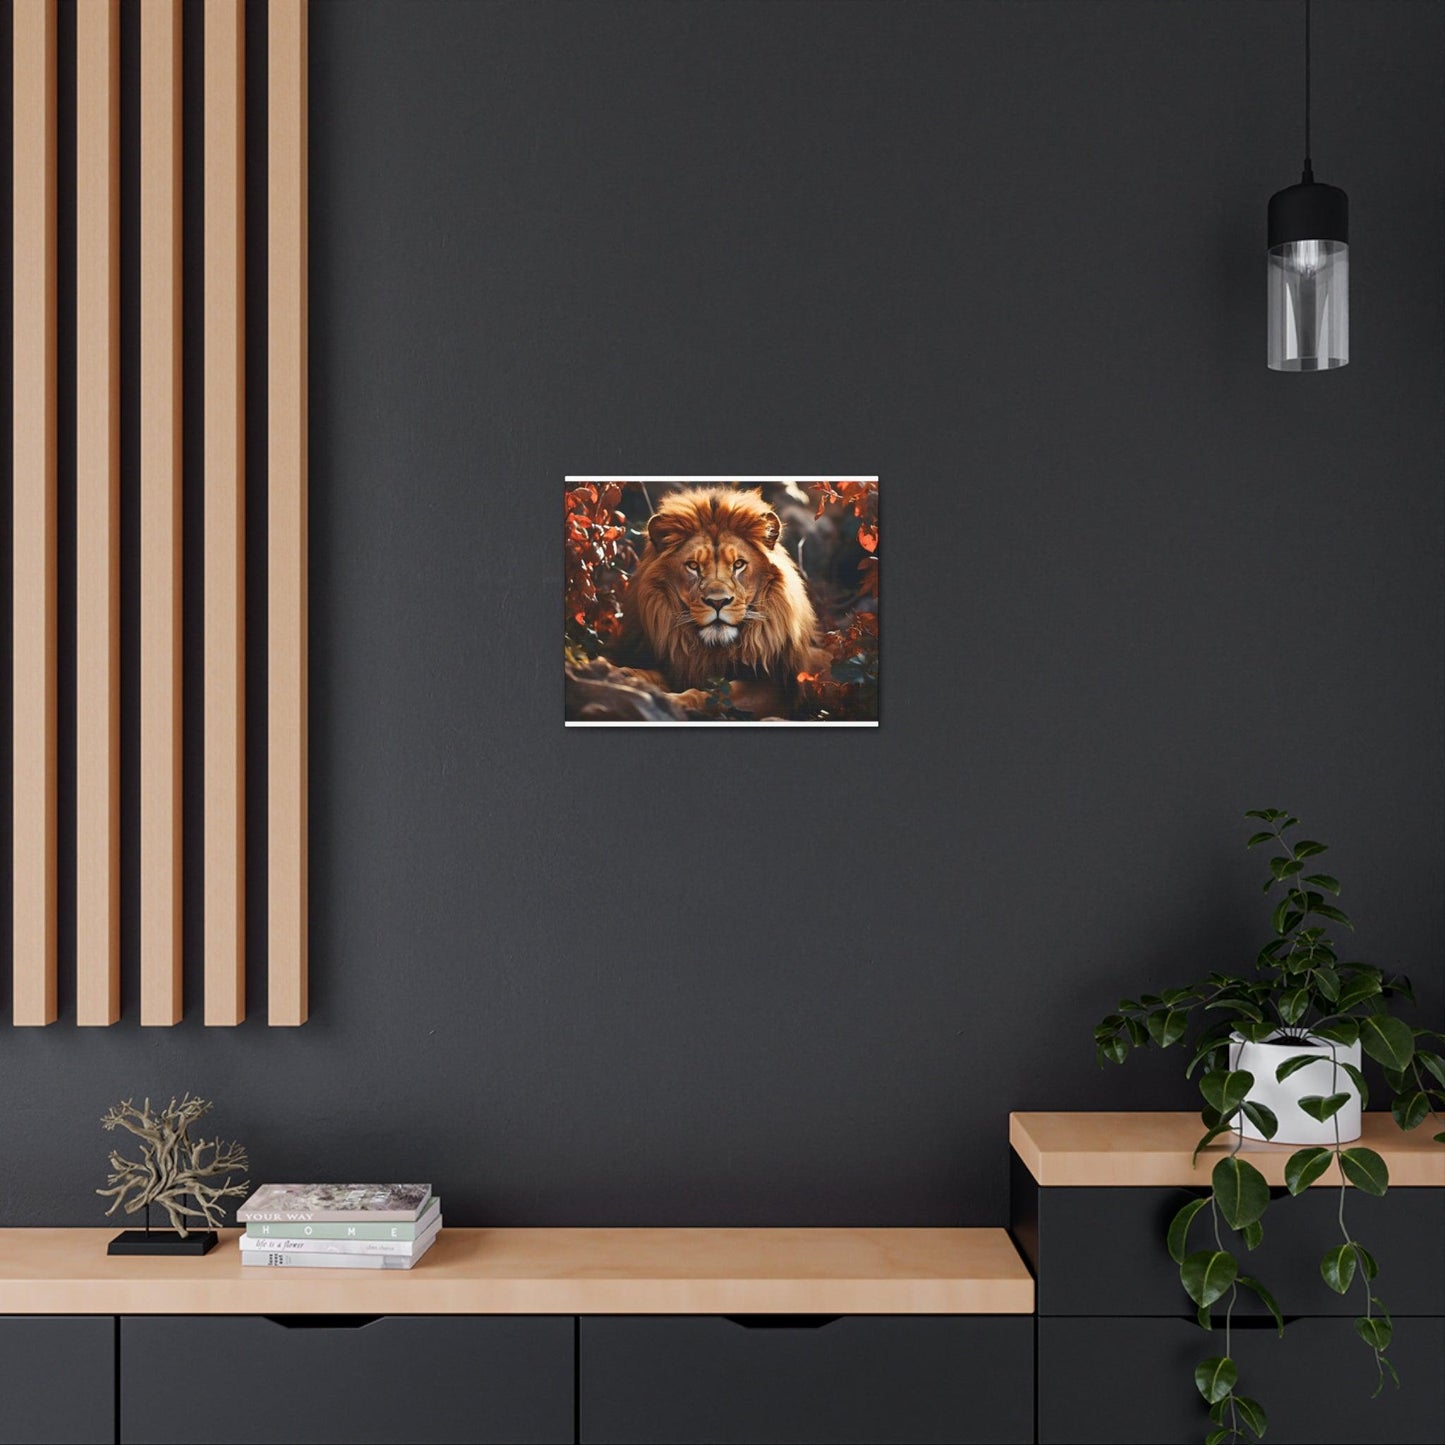 Lion In Nature Art Canvas Gallery Wraps Lion Print Large Canvas Art Animal Wall Art minimalist Wall Art Lover Gift